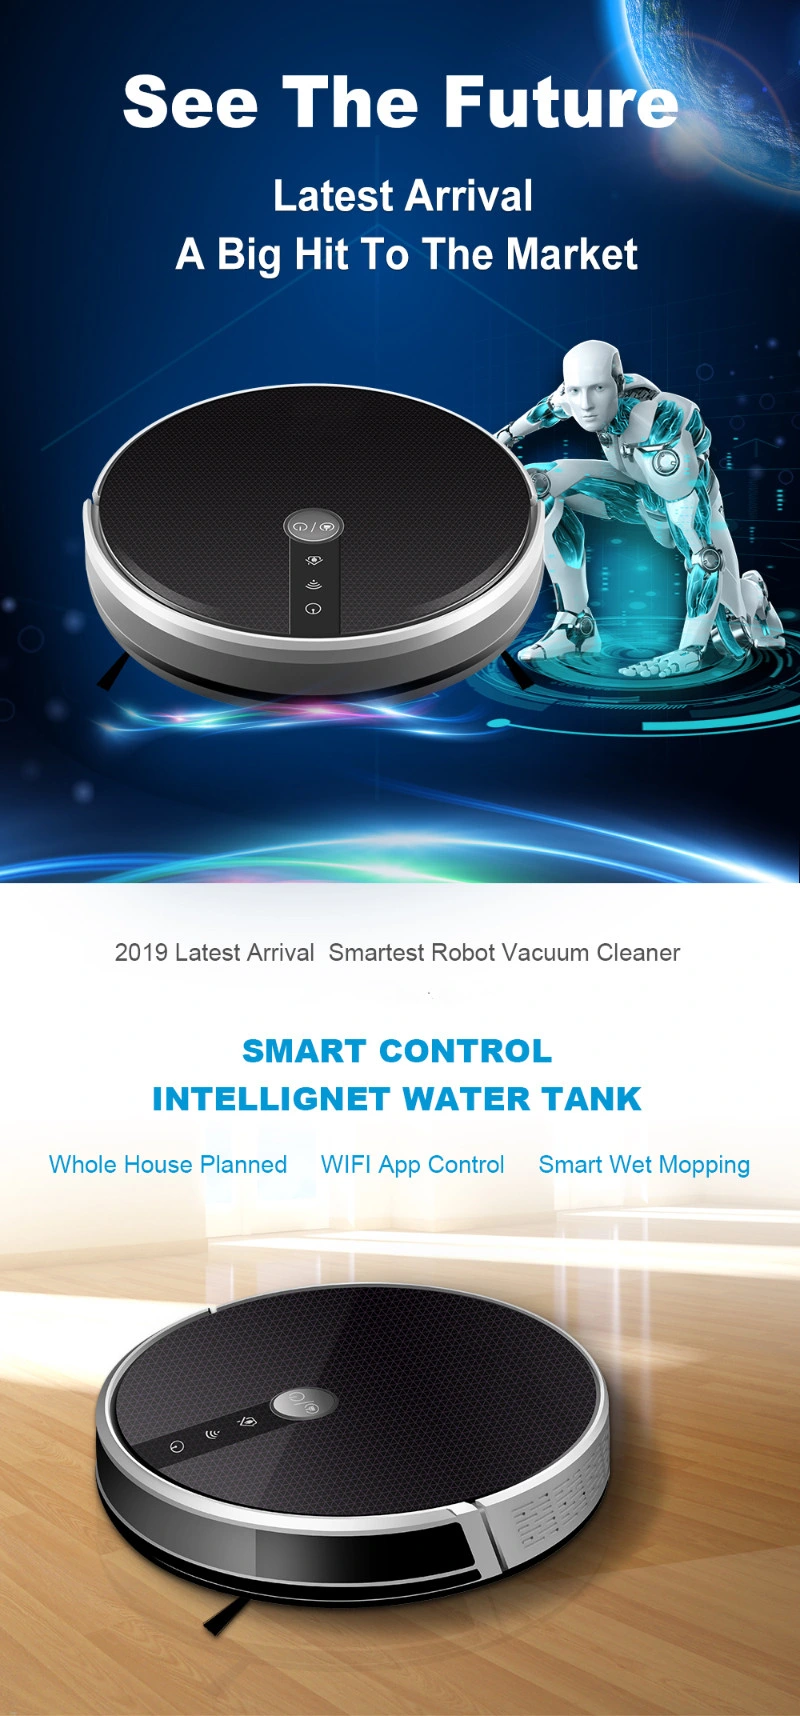 Wholesale Household Smart Automatic Intelligent Cleaning Robot Vacuum Cleaner Washing Machine Home Application Sweeper